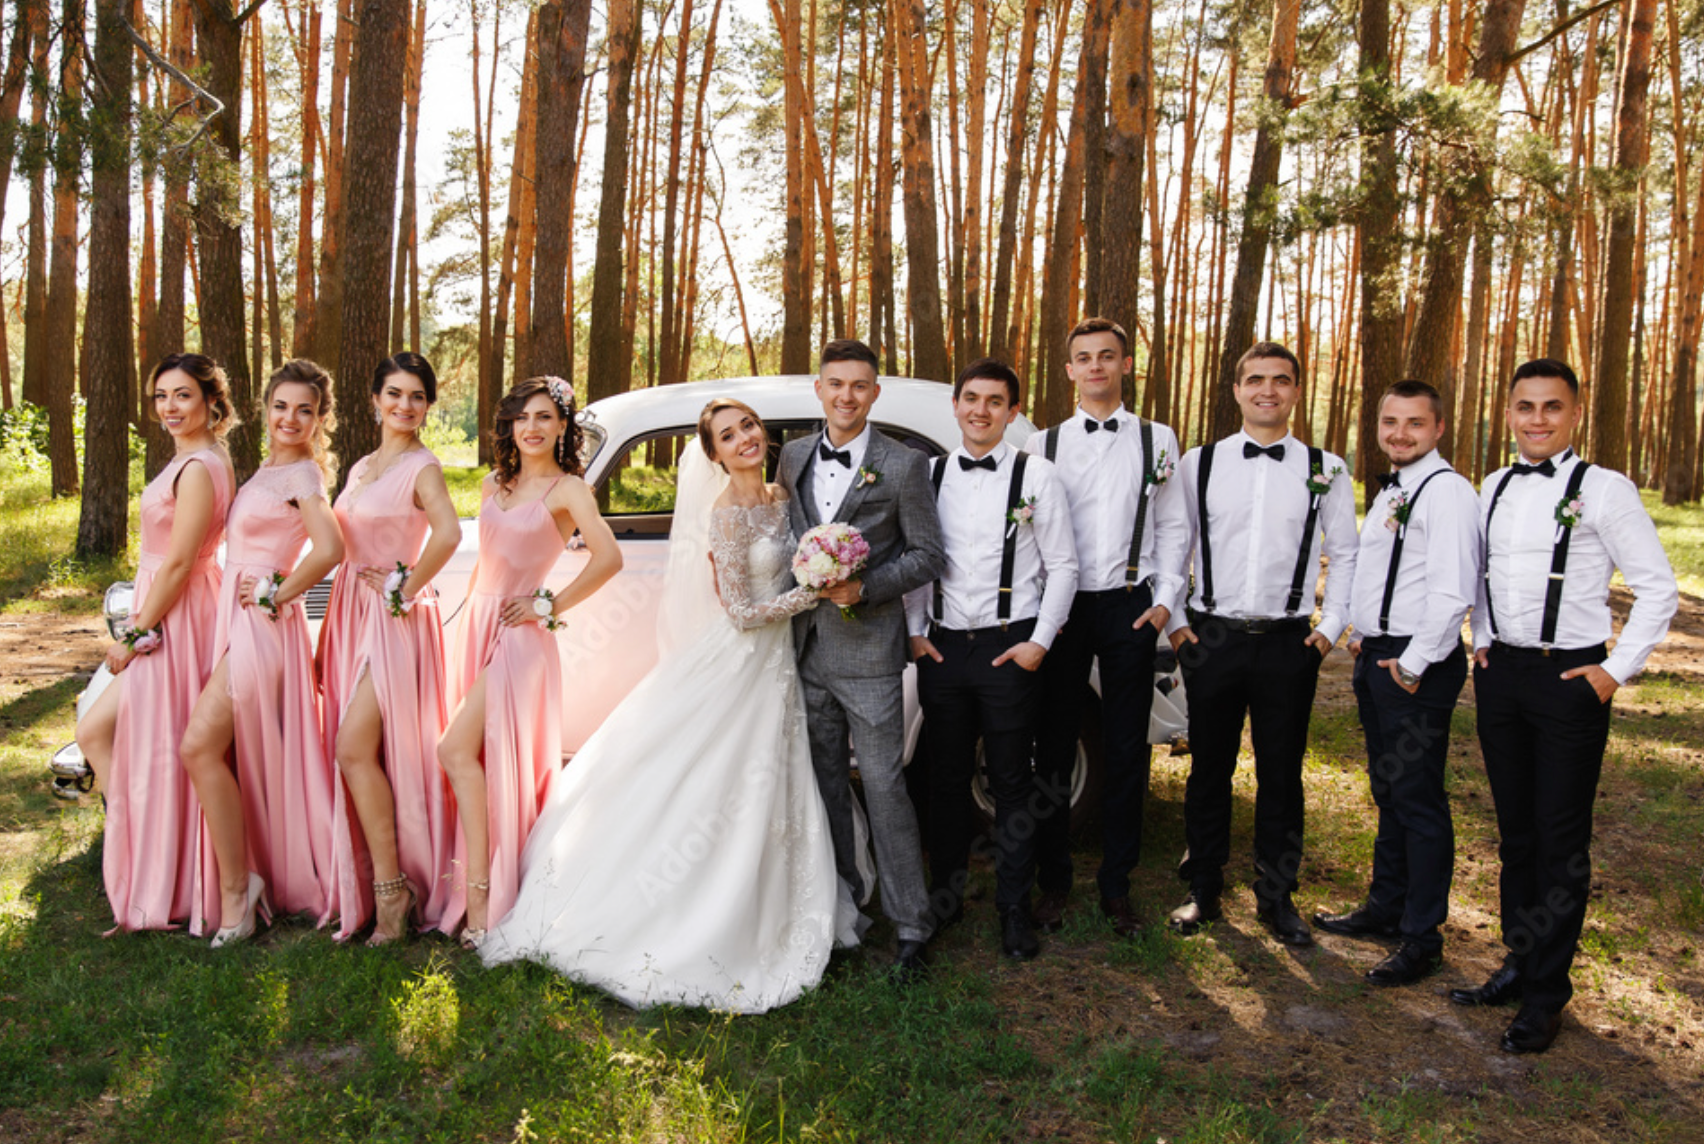 Choosing the Perfect Bridal Party: Tips for Selecting Your Groomsmen or Bridesmaids